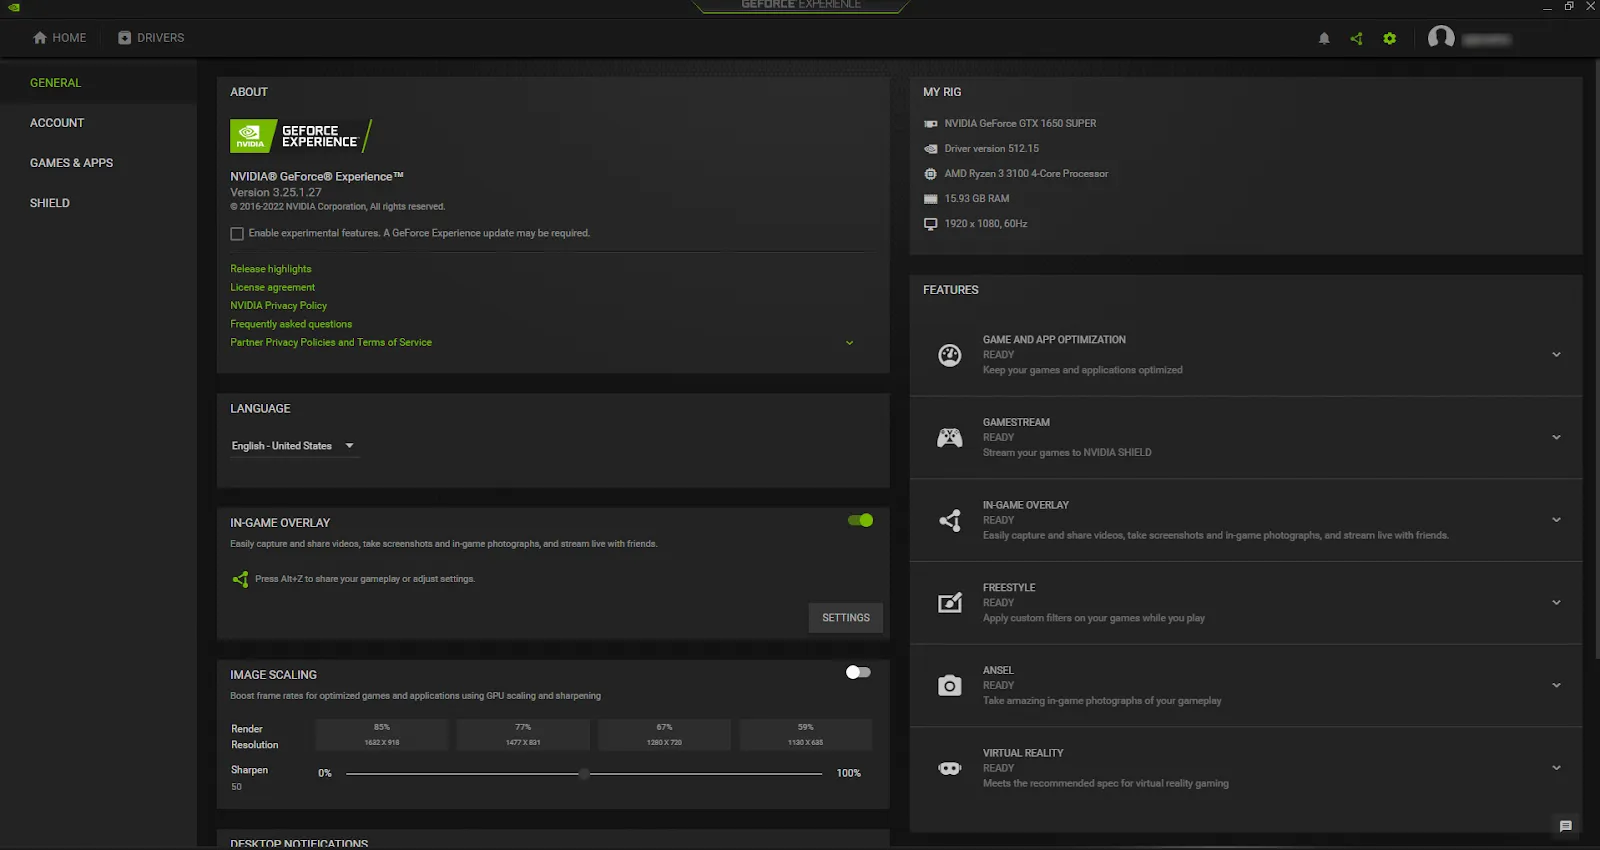 You'll need to register an Nvidia account prior to using this program.